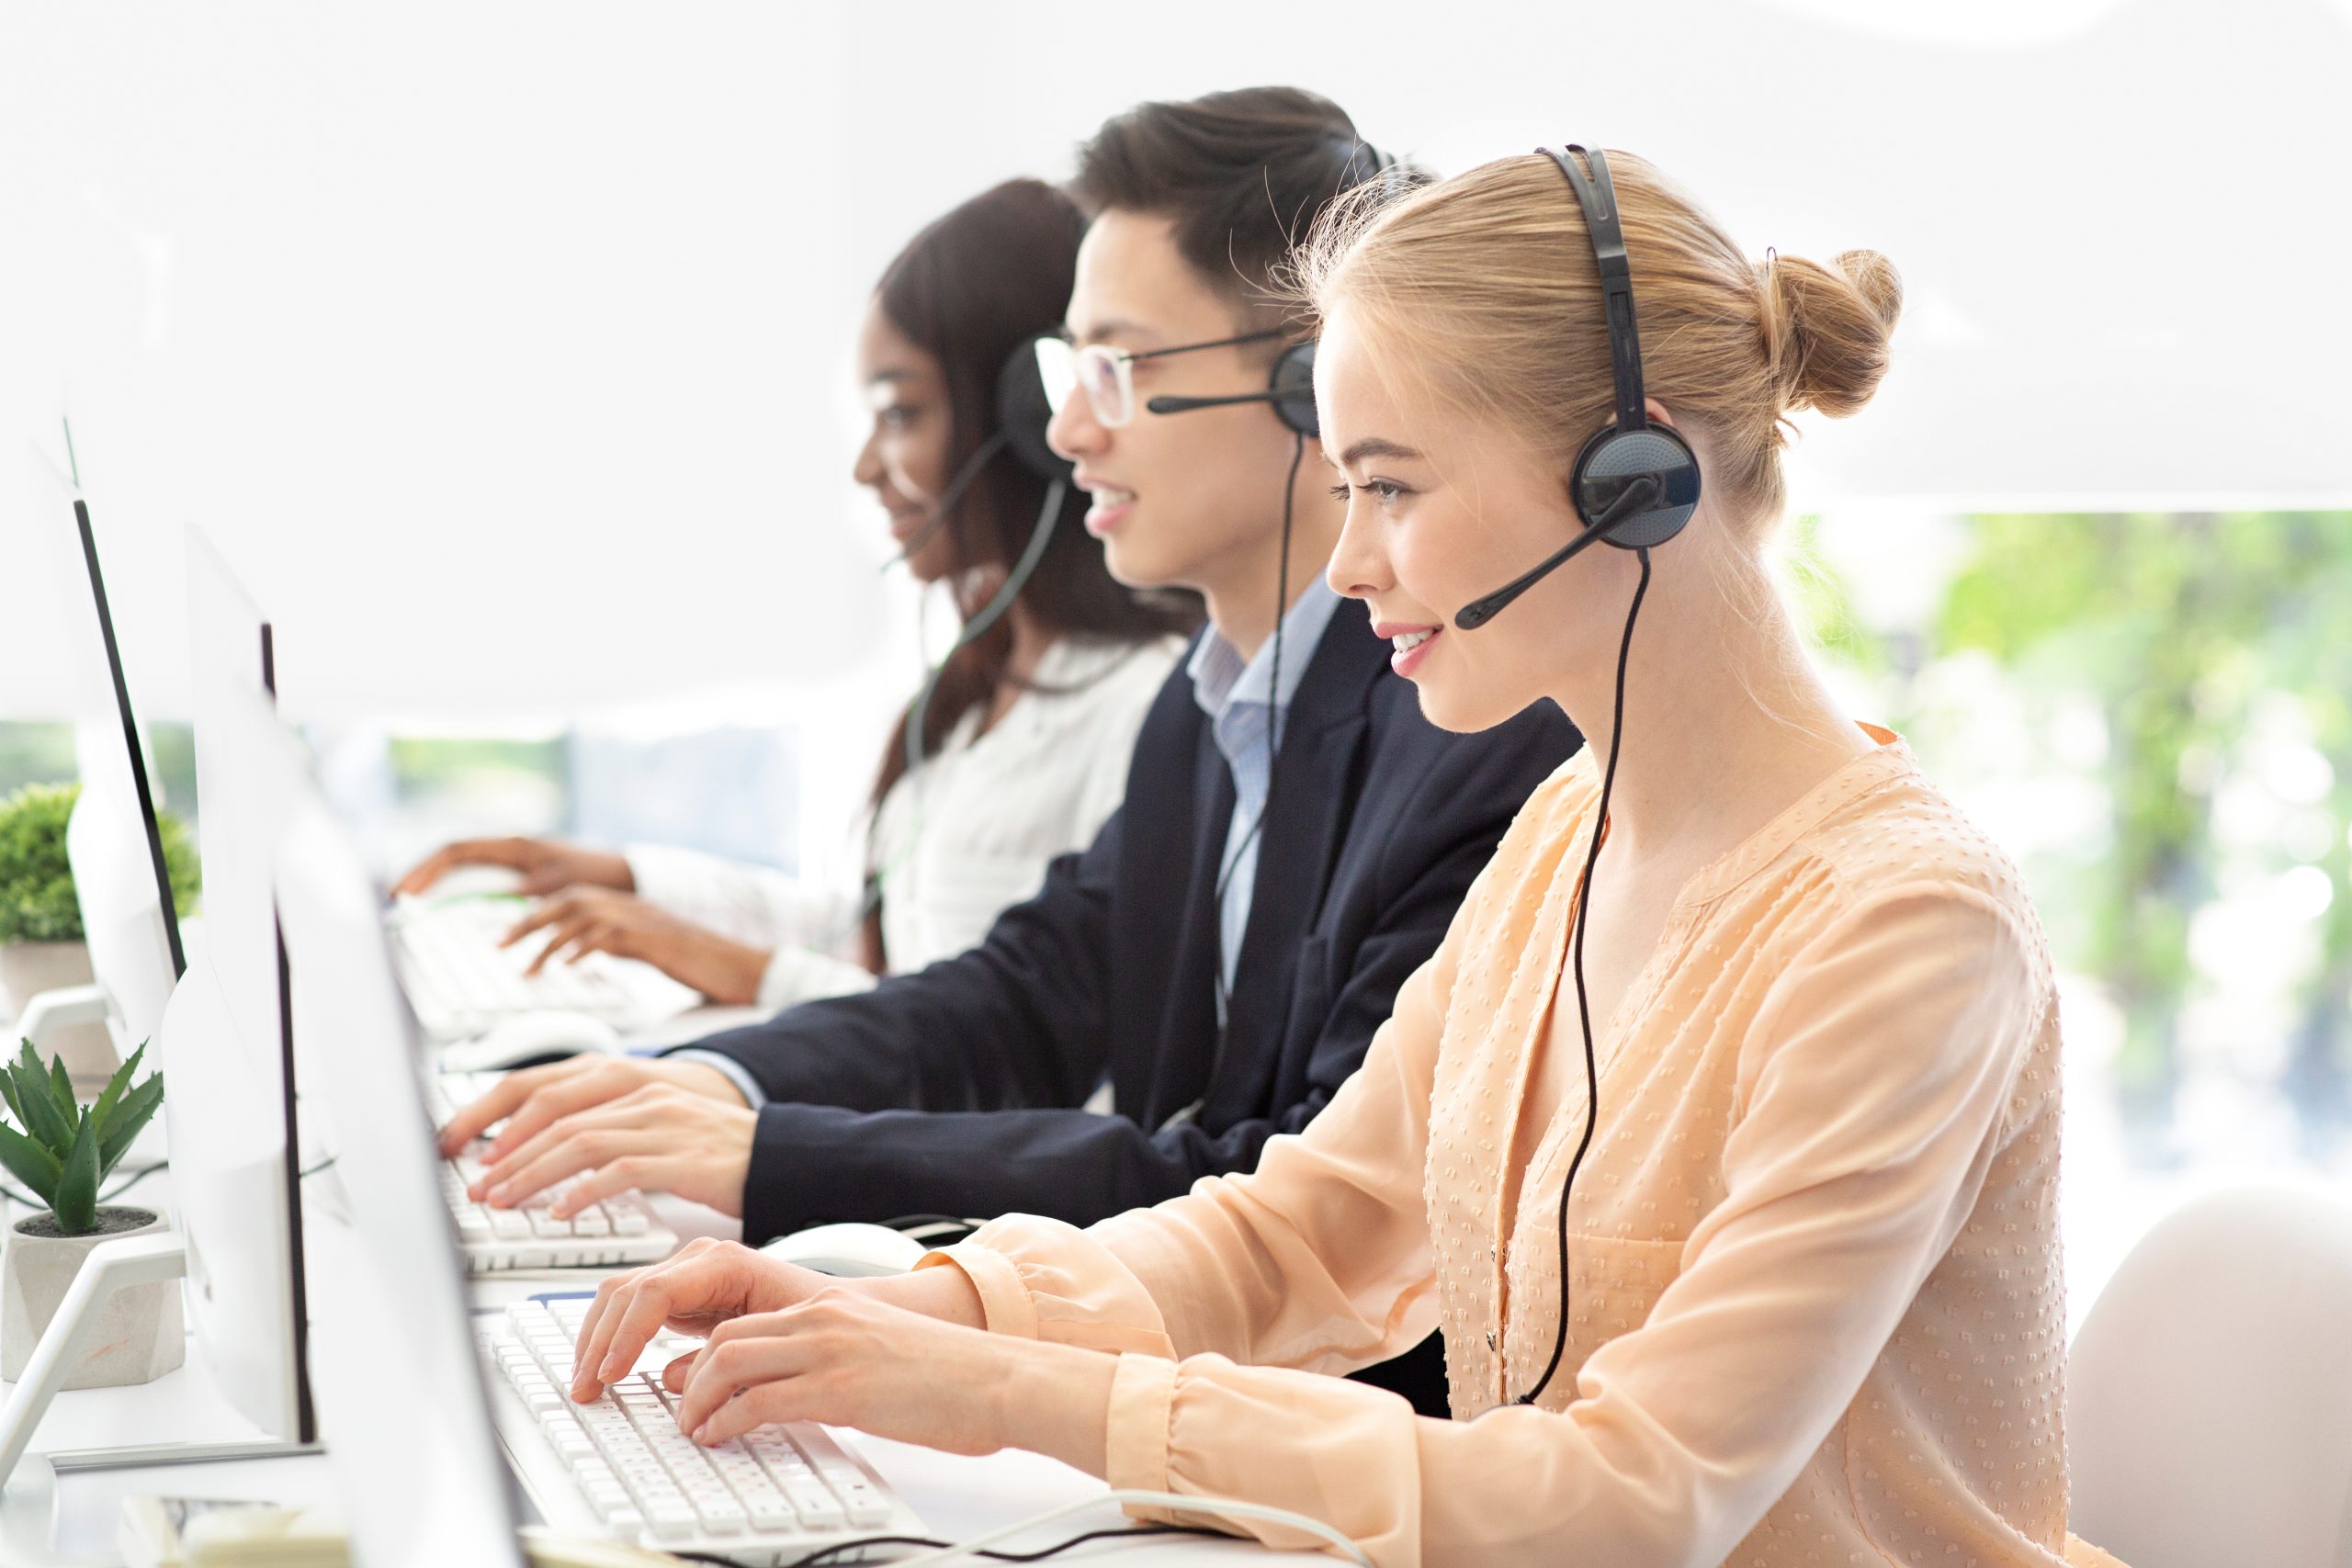 The 5 biggest myths about telemarketing